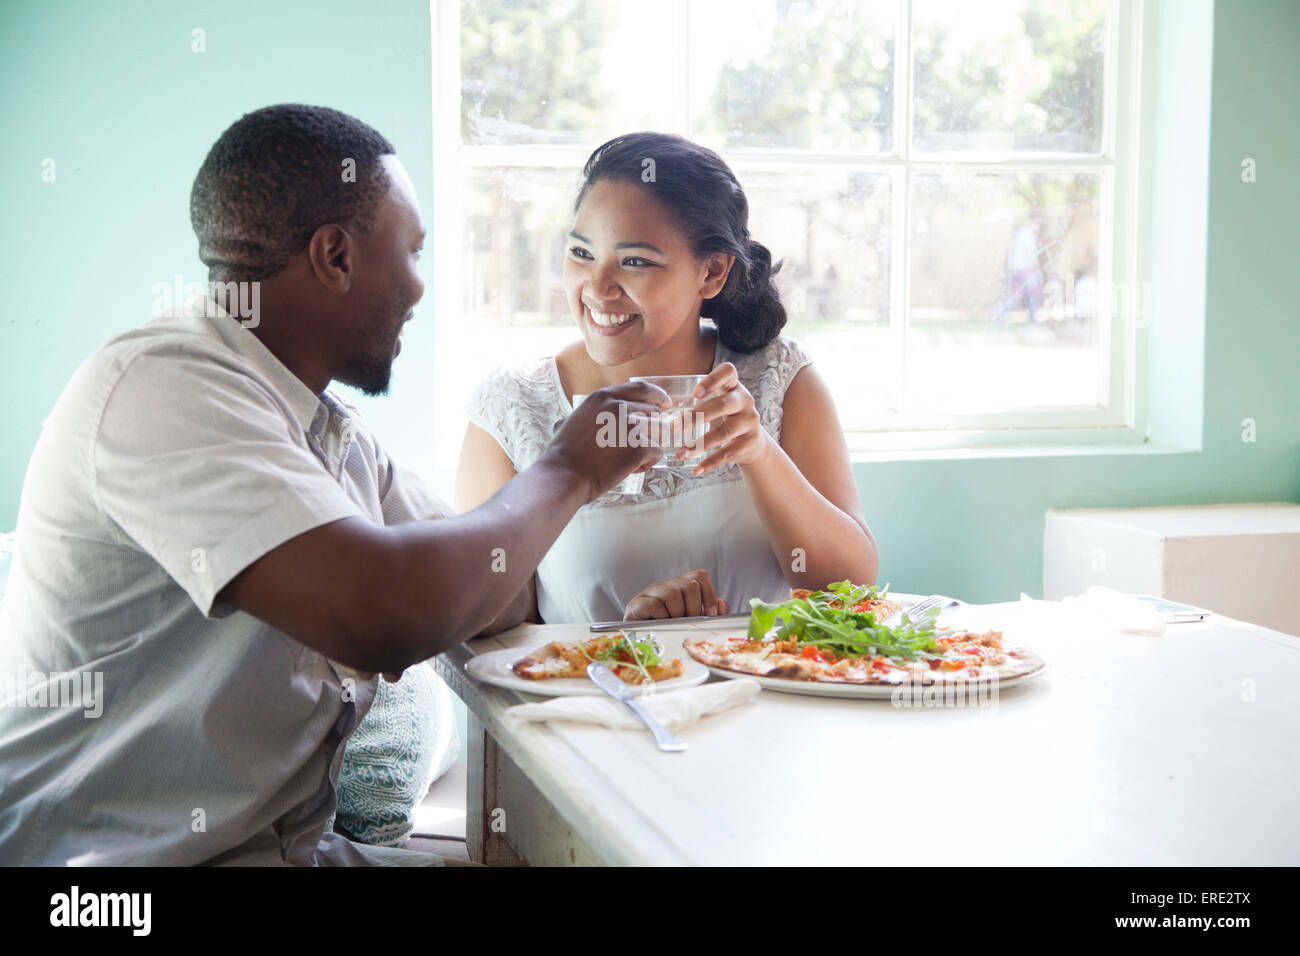 Smiling couple toasting at table Stock Photo